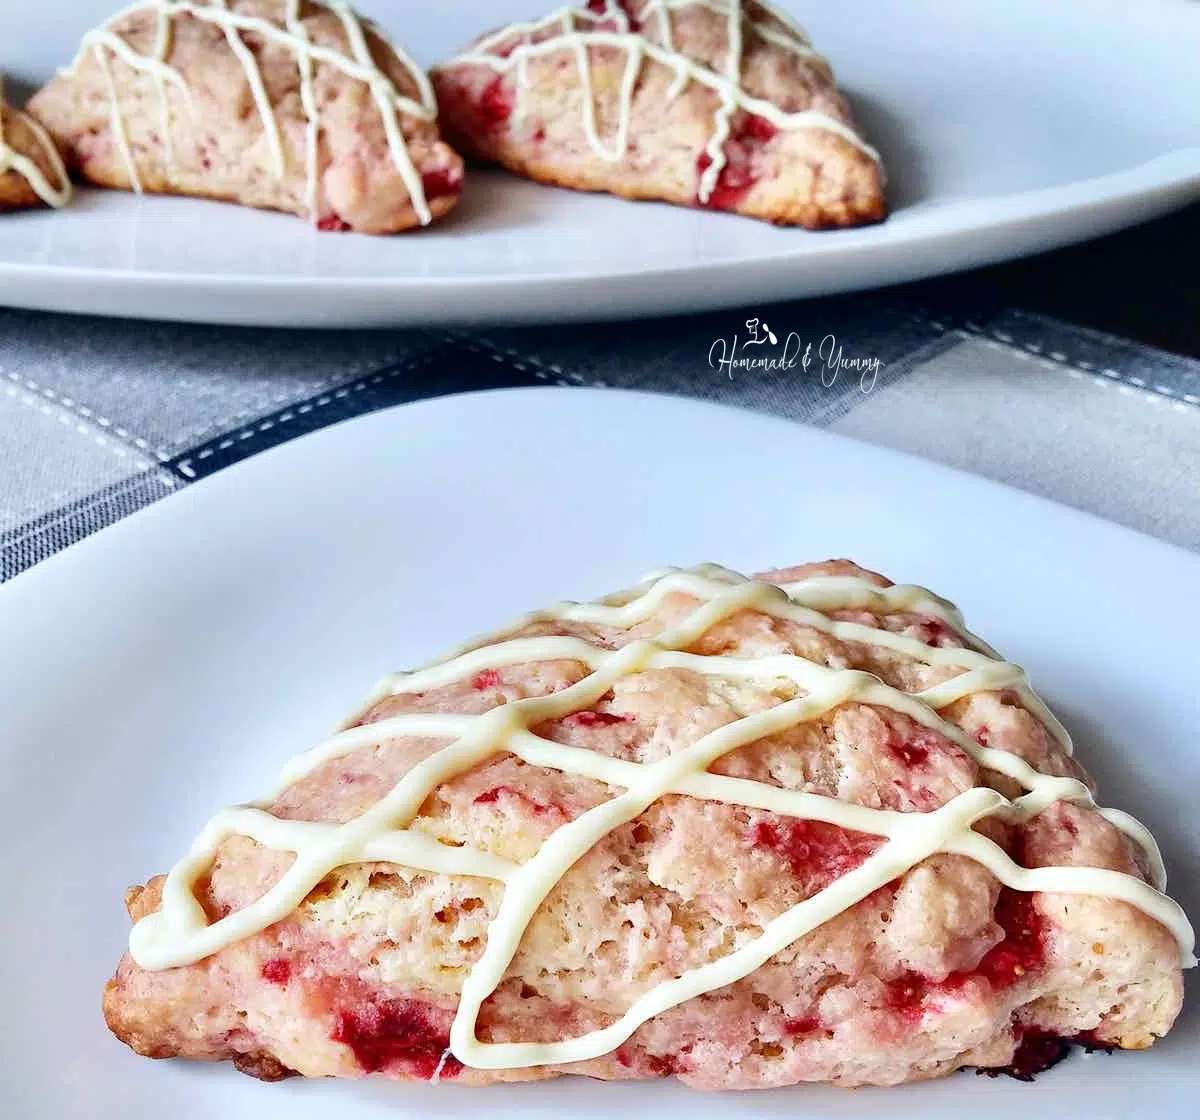 Strawberry scone recipe with white chocolate, ready to eat.